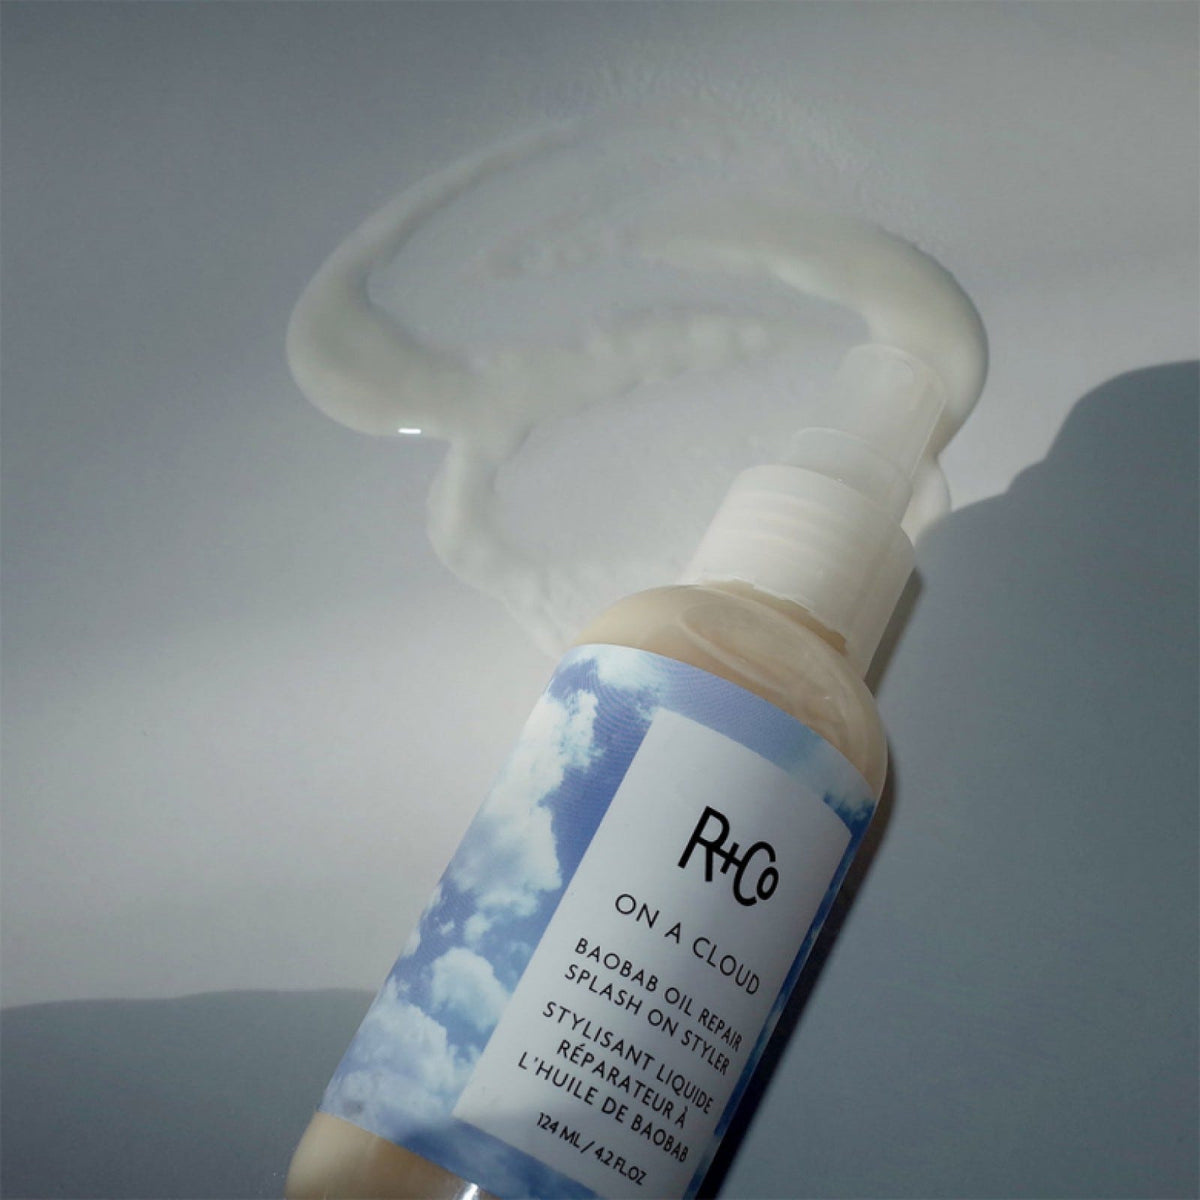 R+CO - TOn a Cloud Baobab Oil Repair Splash on Styler |4.2 oz| - ProCare Outlet by R+CO